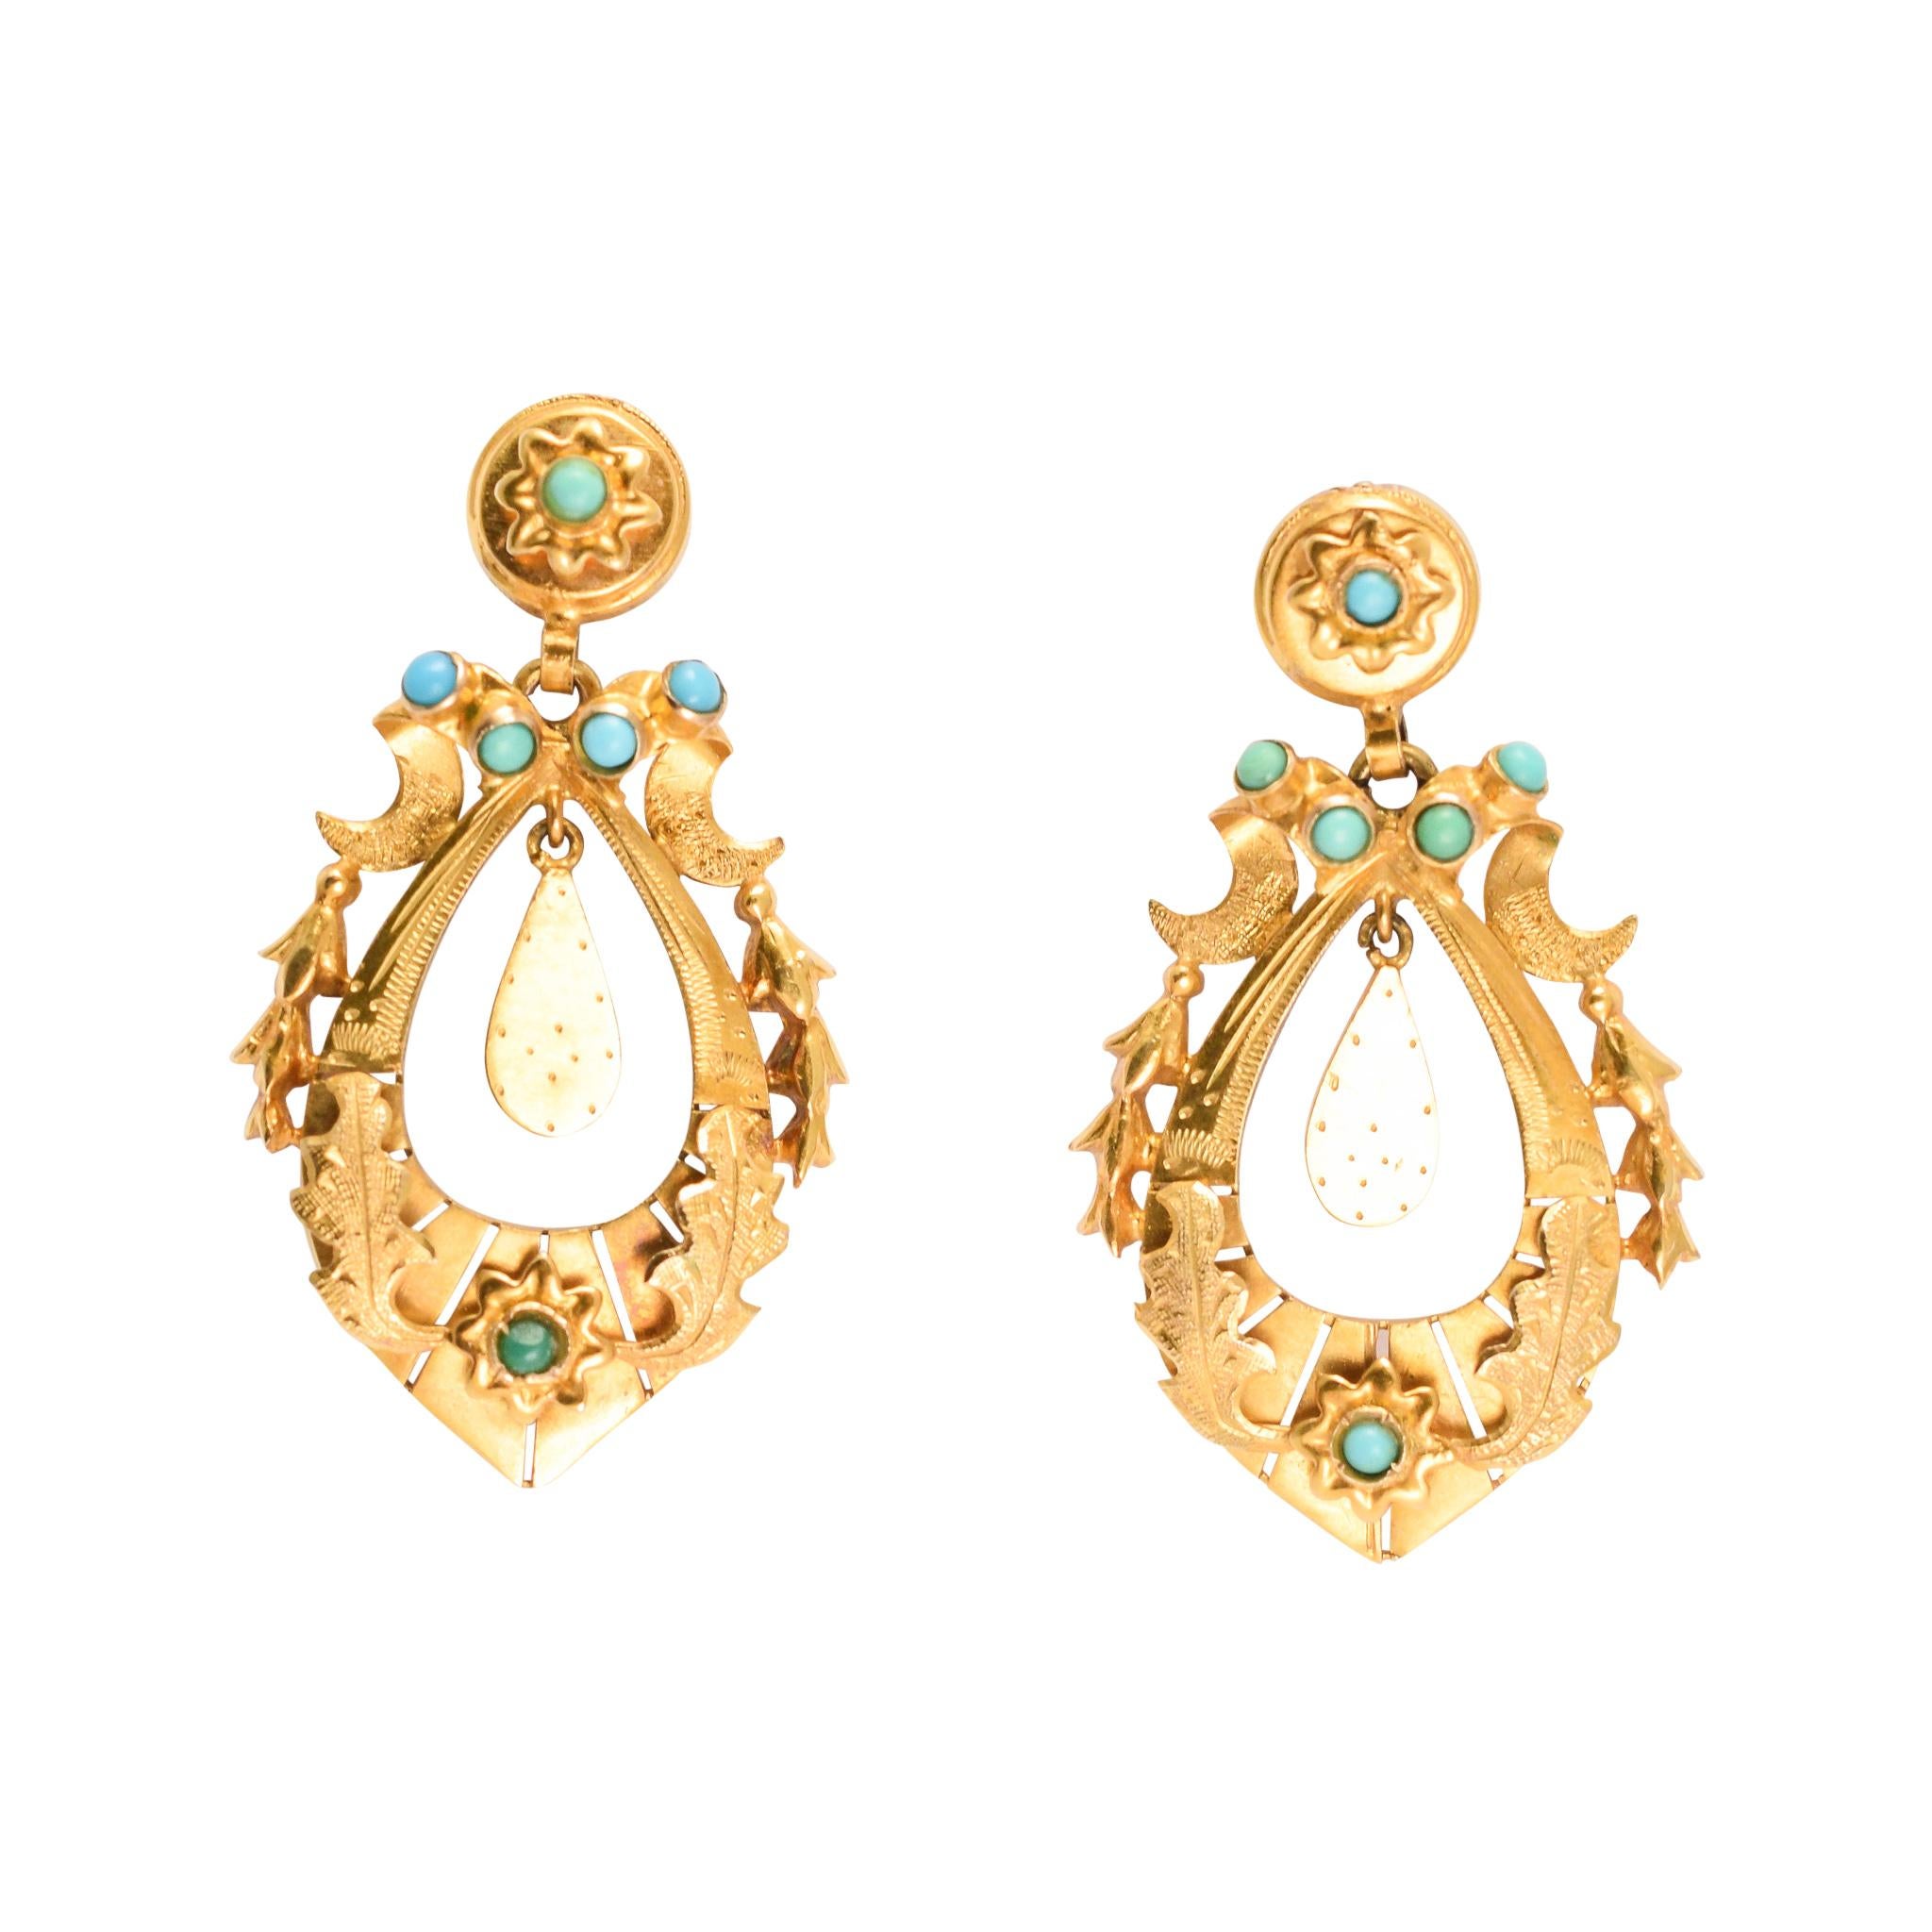 Antique Mid-Victorian Turquoise "Crescent & Star" Earrings